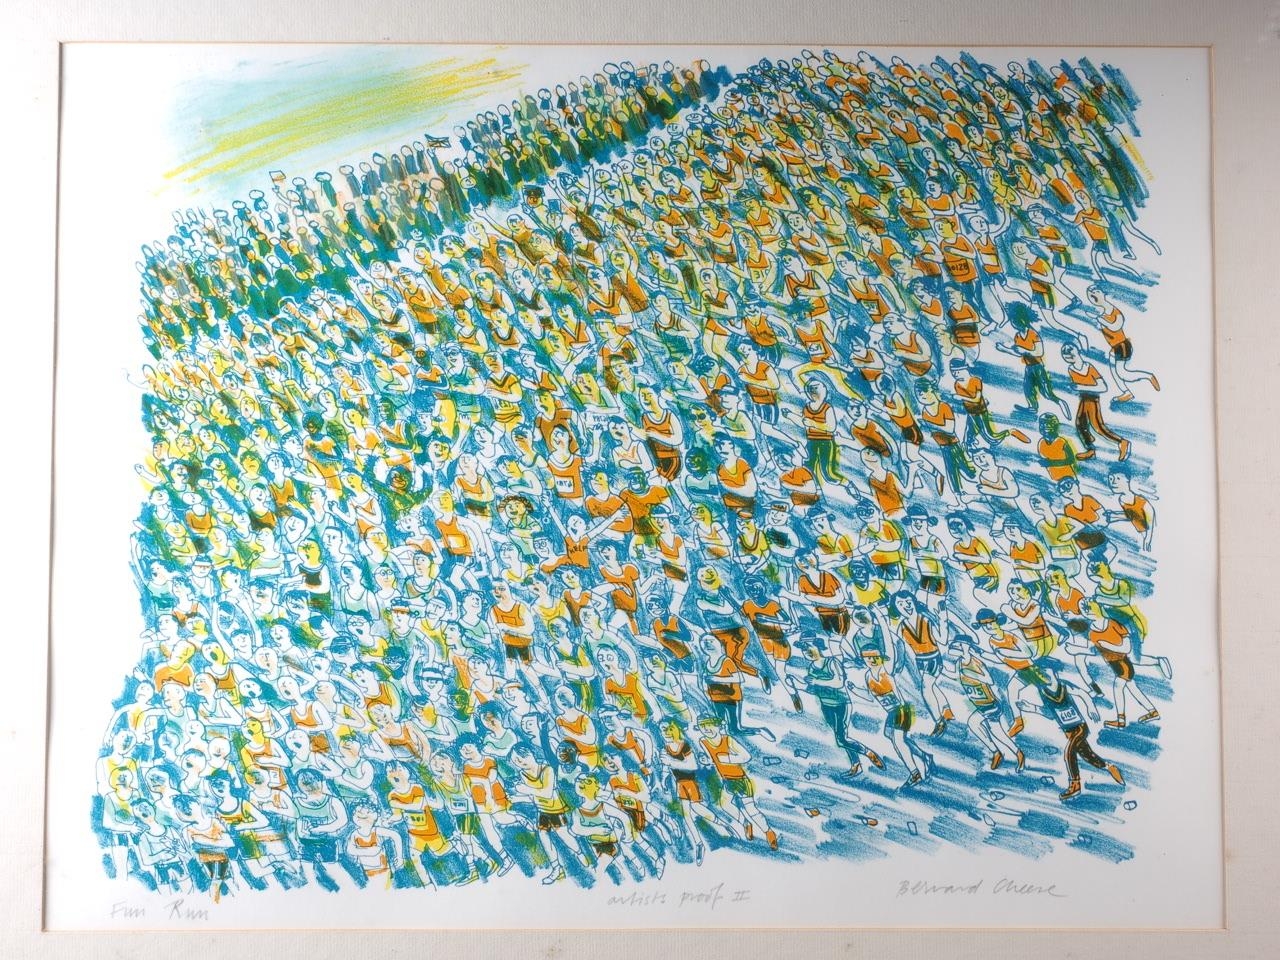 Bernard Cheese: a signed limited edition lithograph, "Fun Run" 1986, Artists Proof II, in strip - Image 2 of 3